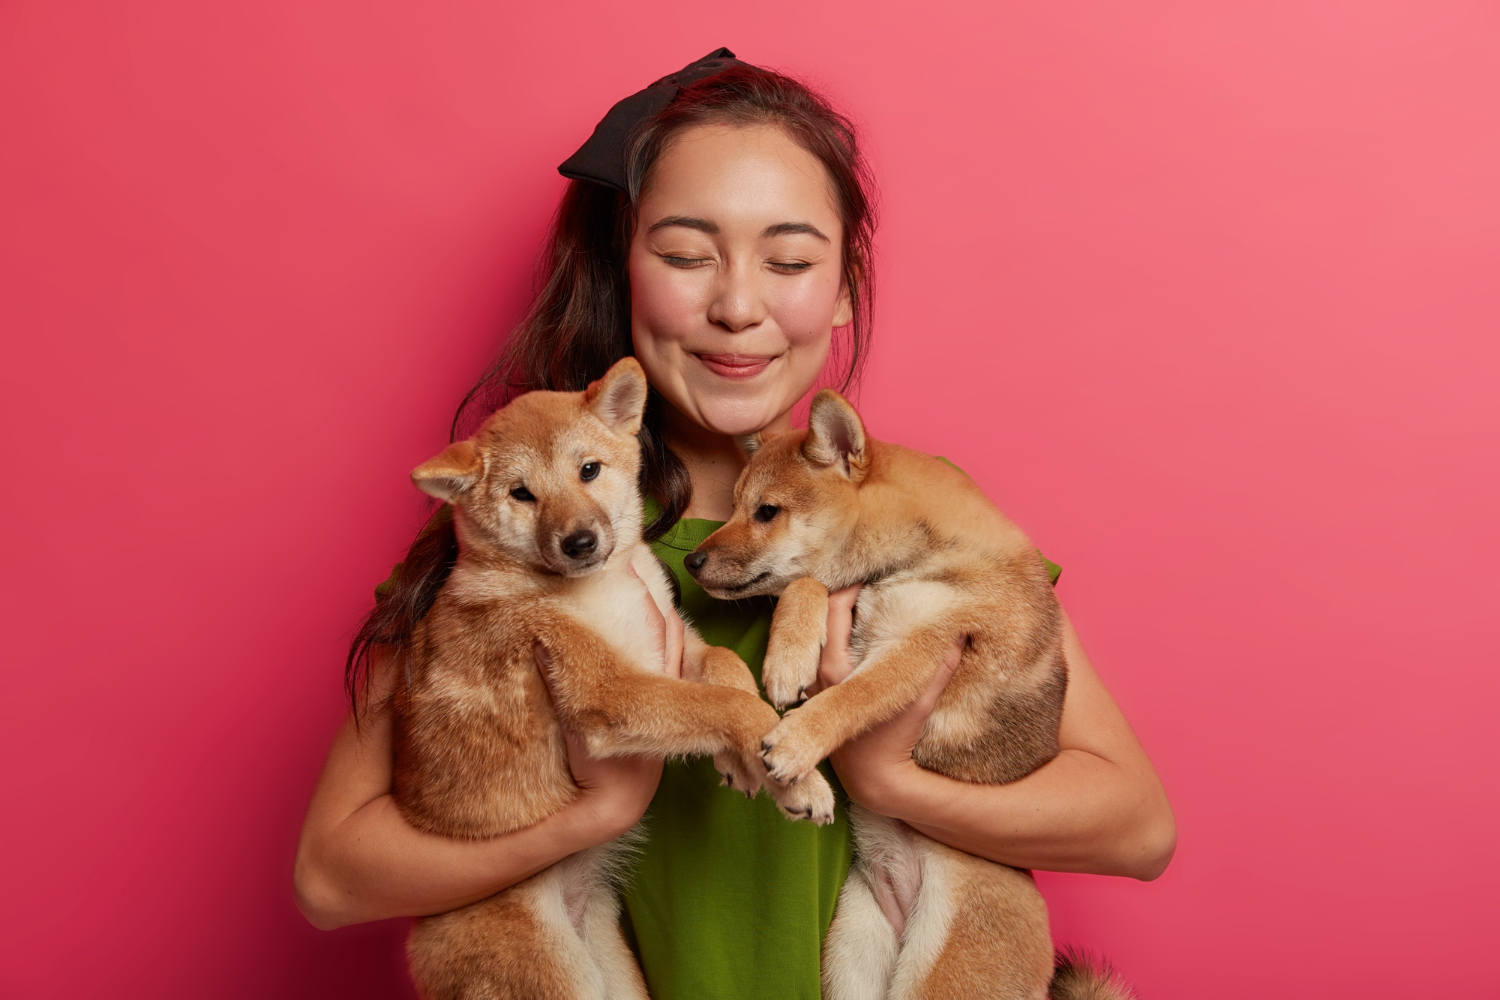 lucky-eastern-woman-found-two-pedigree-puppies-street-finds-host-shiba-inu-dogs-being-pet-lover-stands-glad-with-animals-against-pink-background